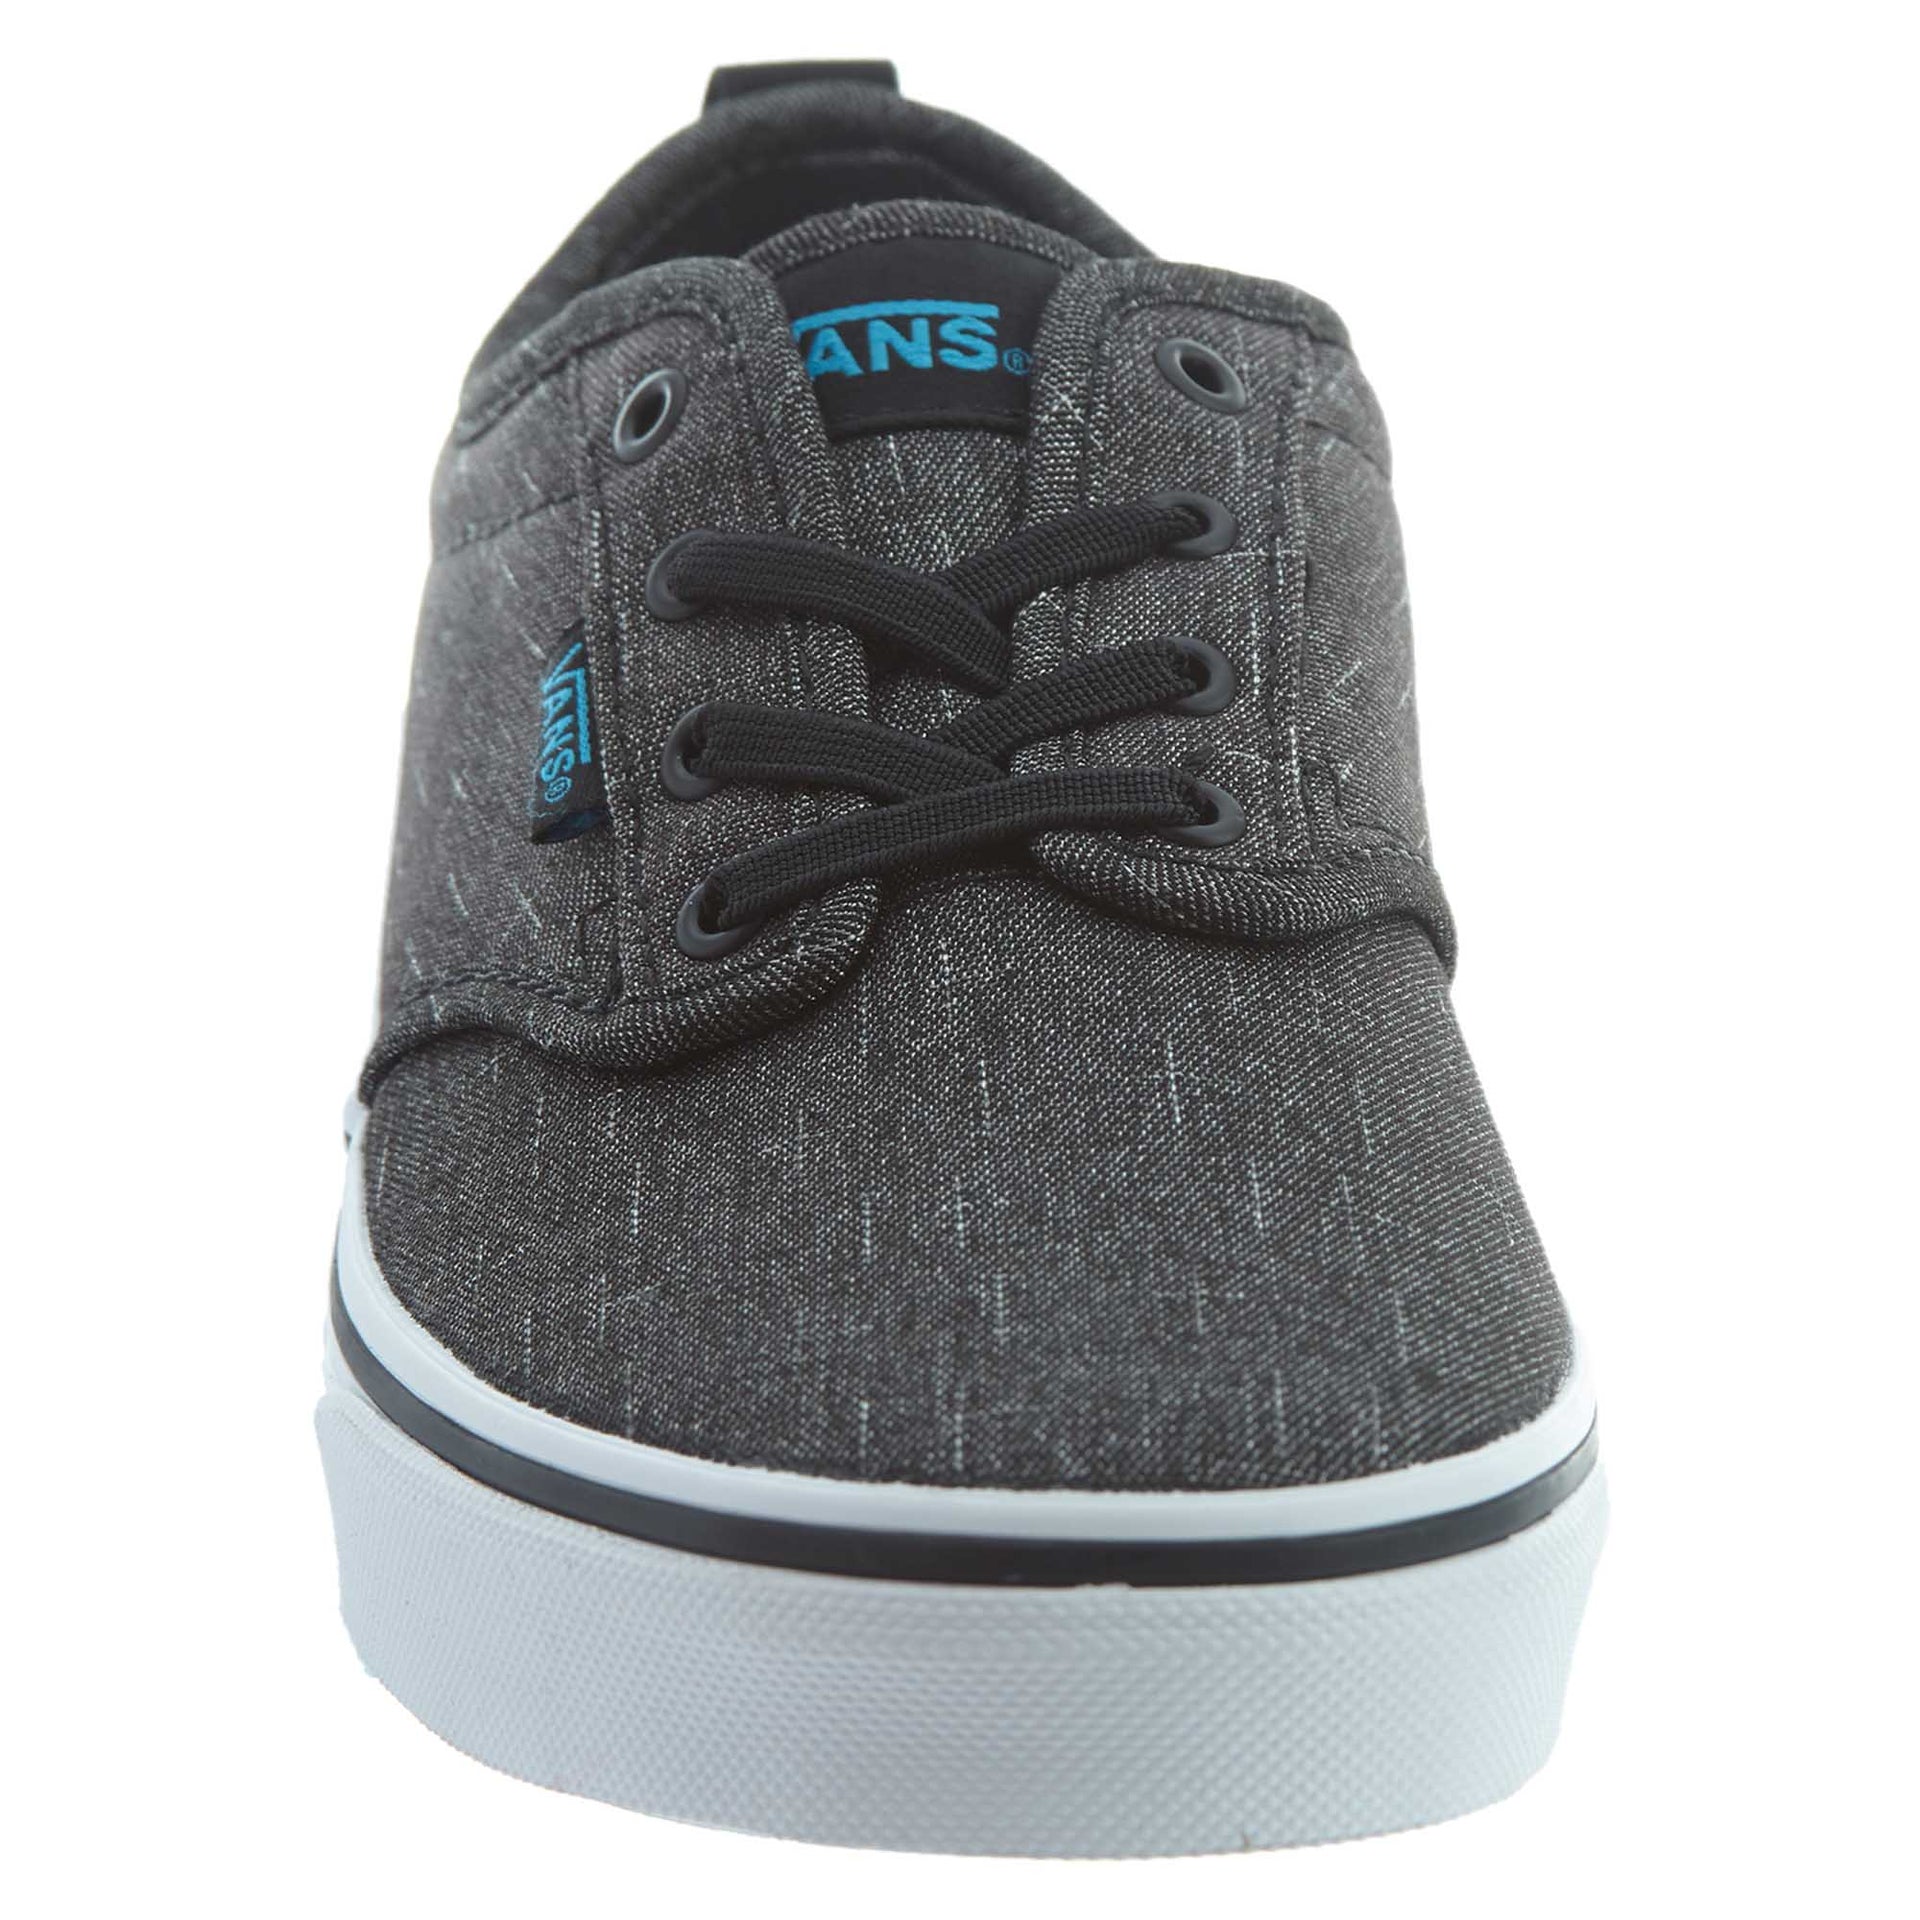 Vans Atwood Slip-on (Textile) Little Kids Style : Vn0004lm-FN8